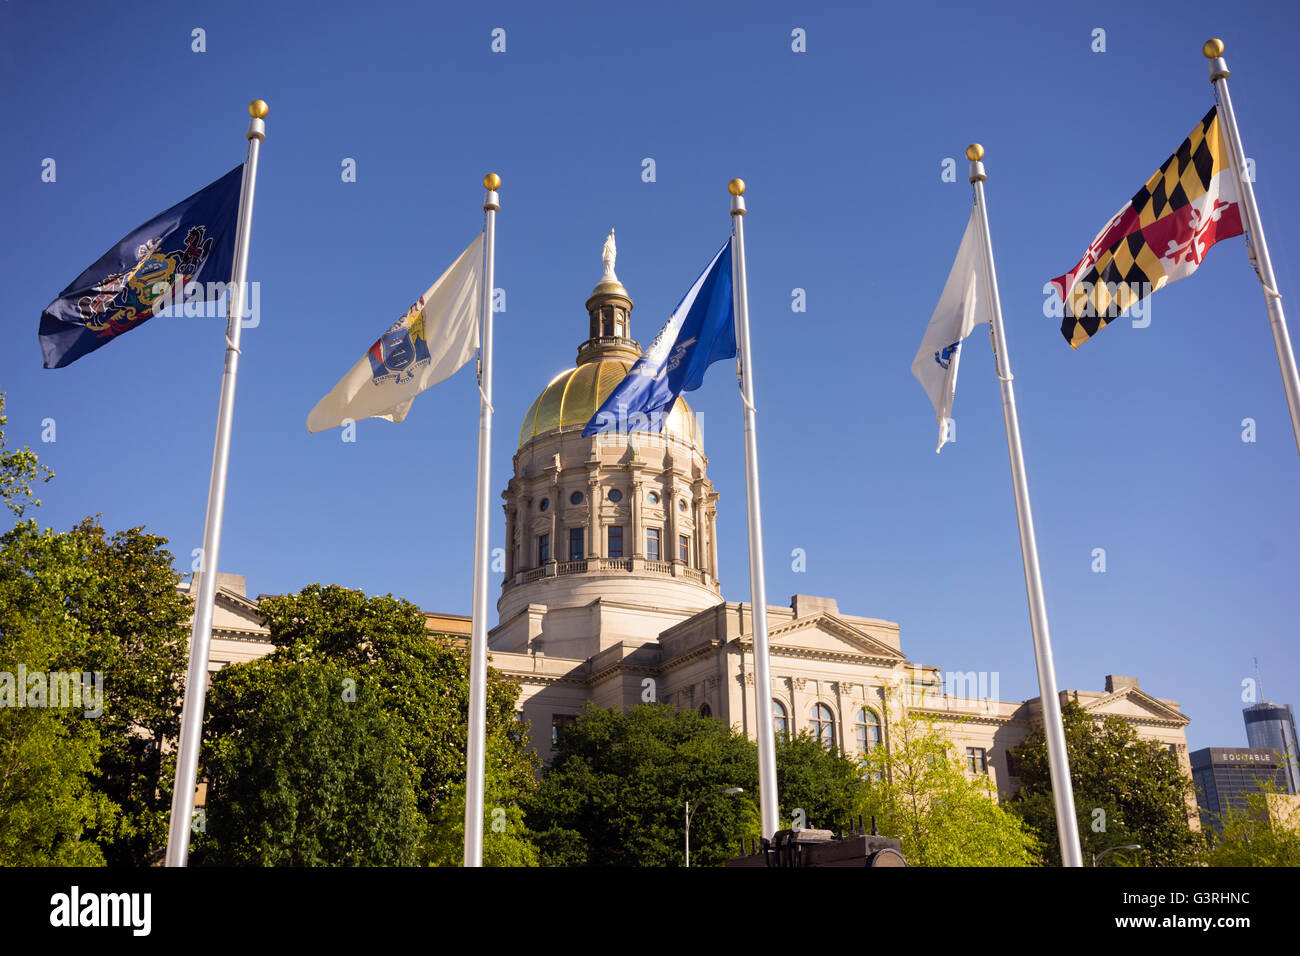 The golden capital dome stands out against a blue sky in Atlanta flags waving Stock Photo